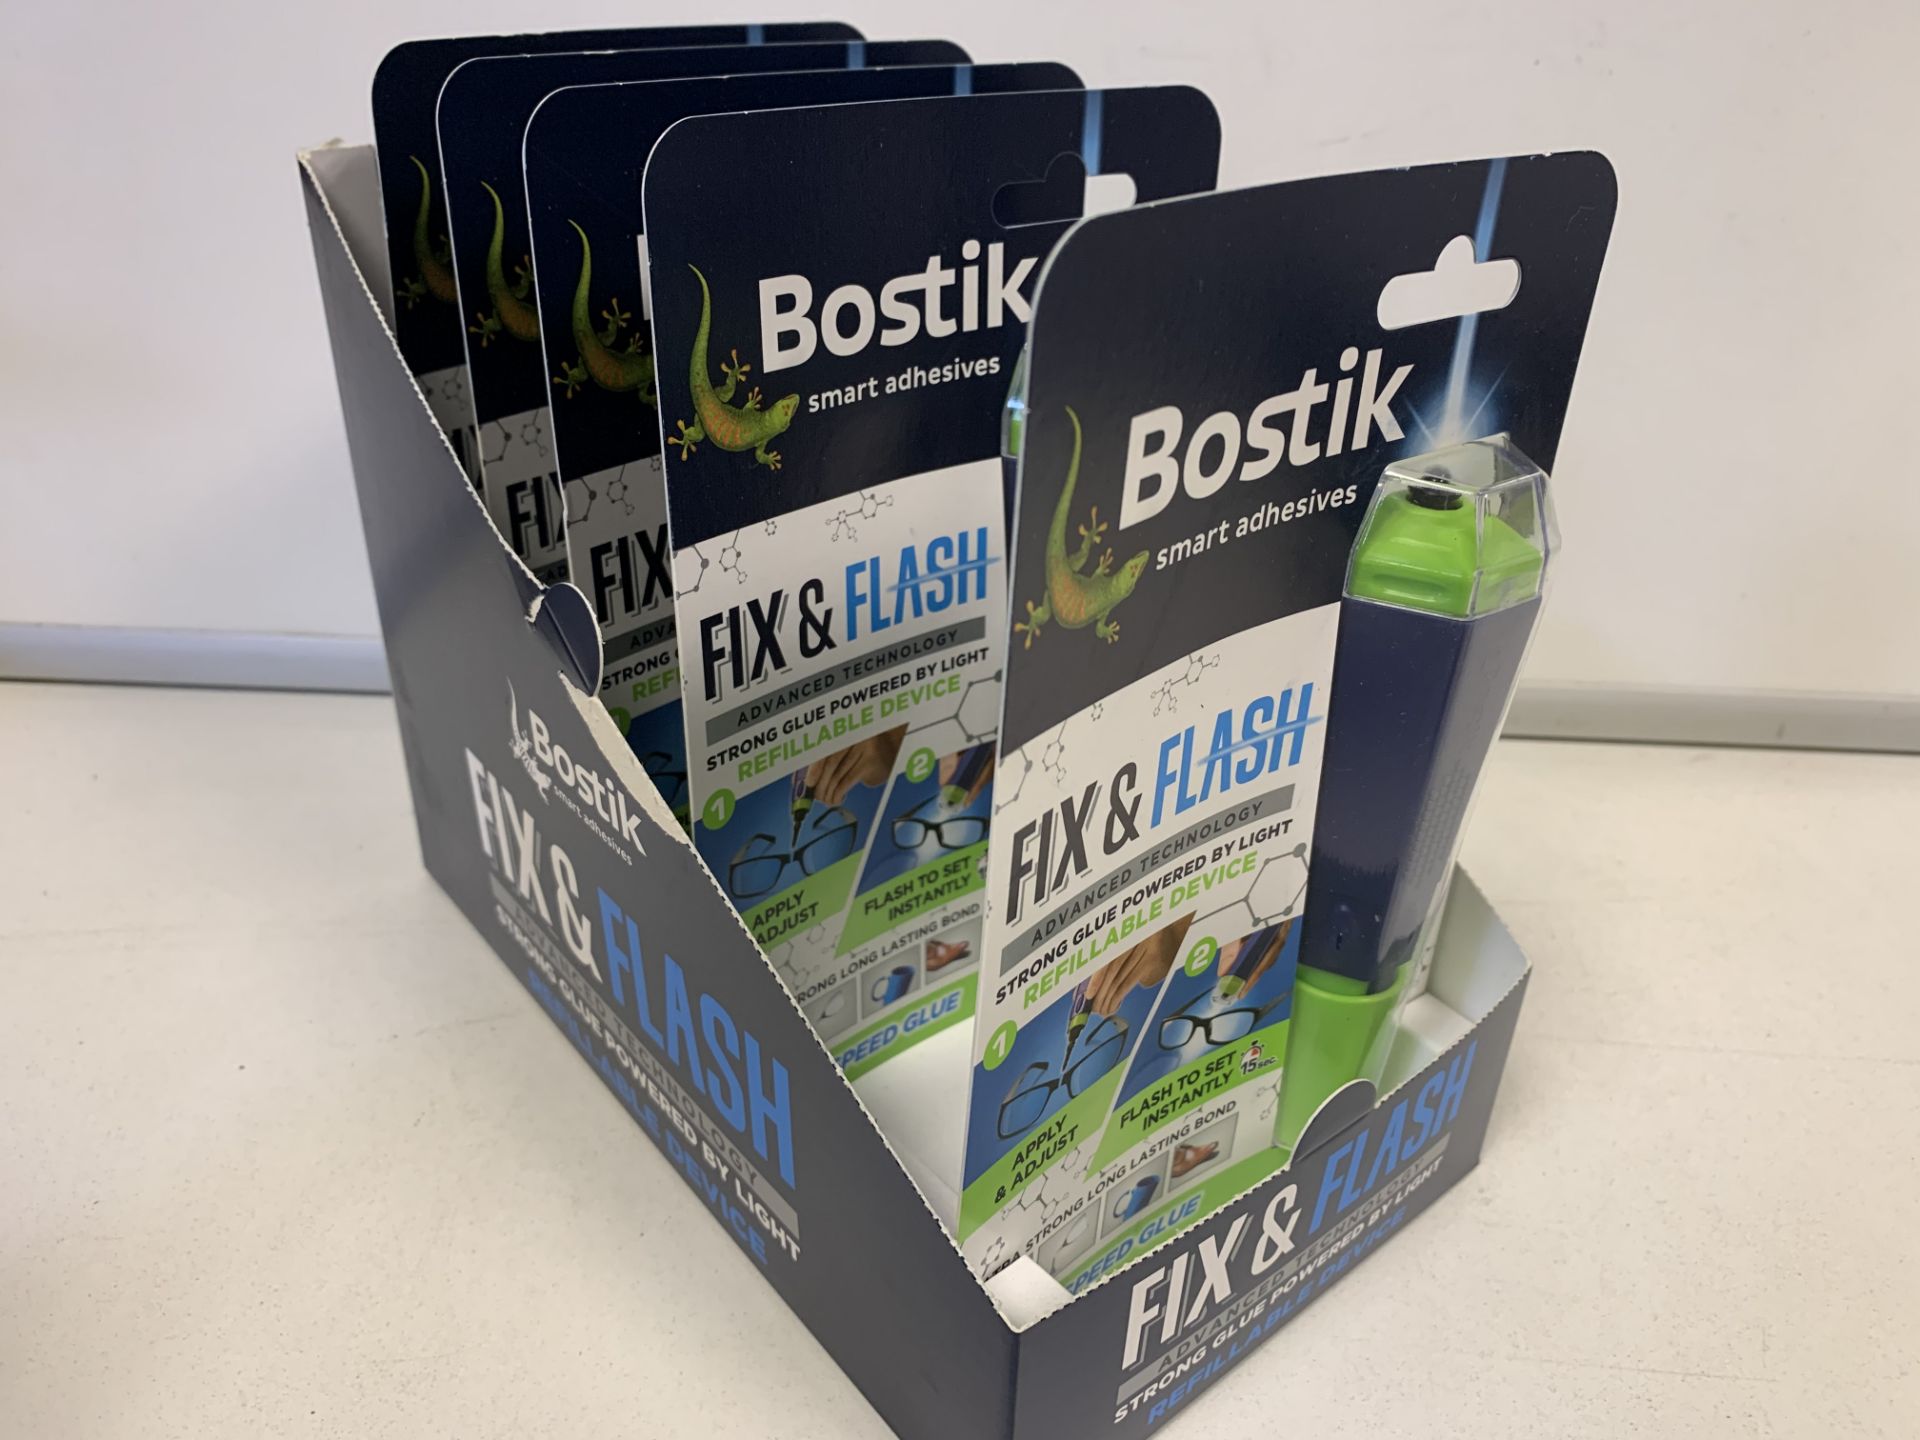 30 X BRAND NEW BOXED BOSTIK SMART ADHESIVES FIX AND FLASH LIGHT SPEED GLUE IN 5 BOXES